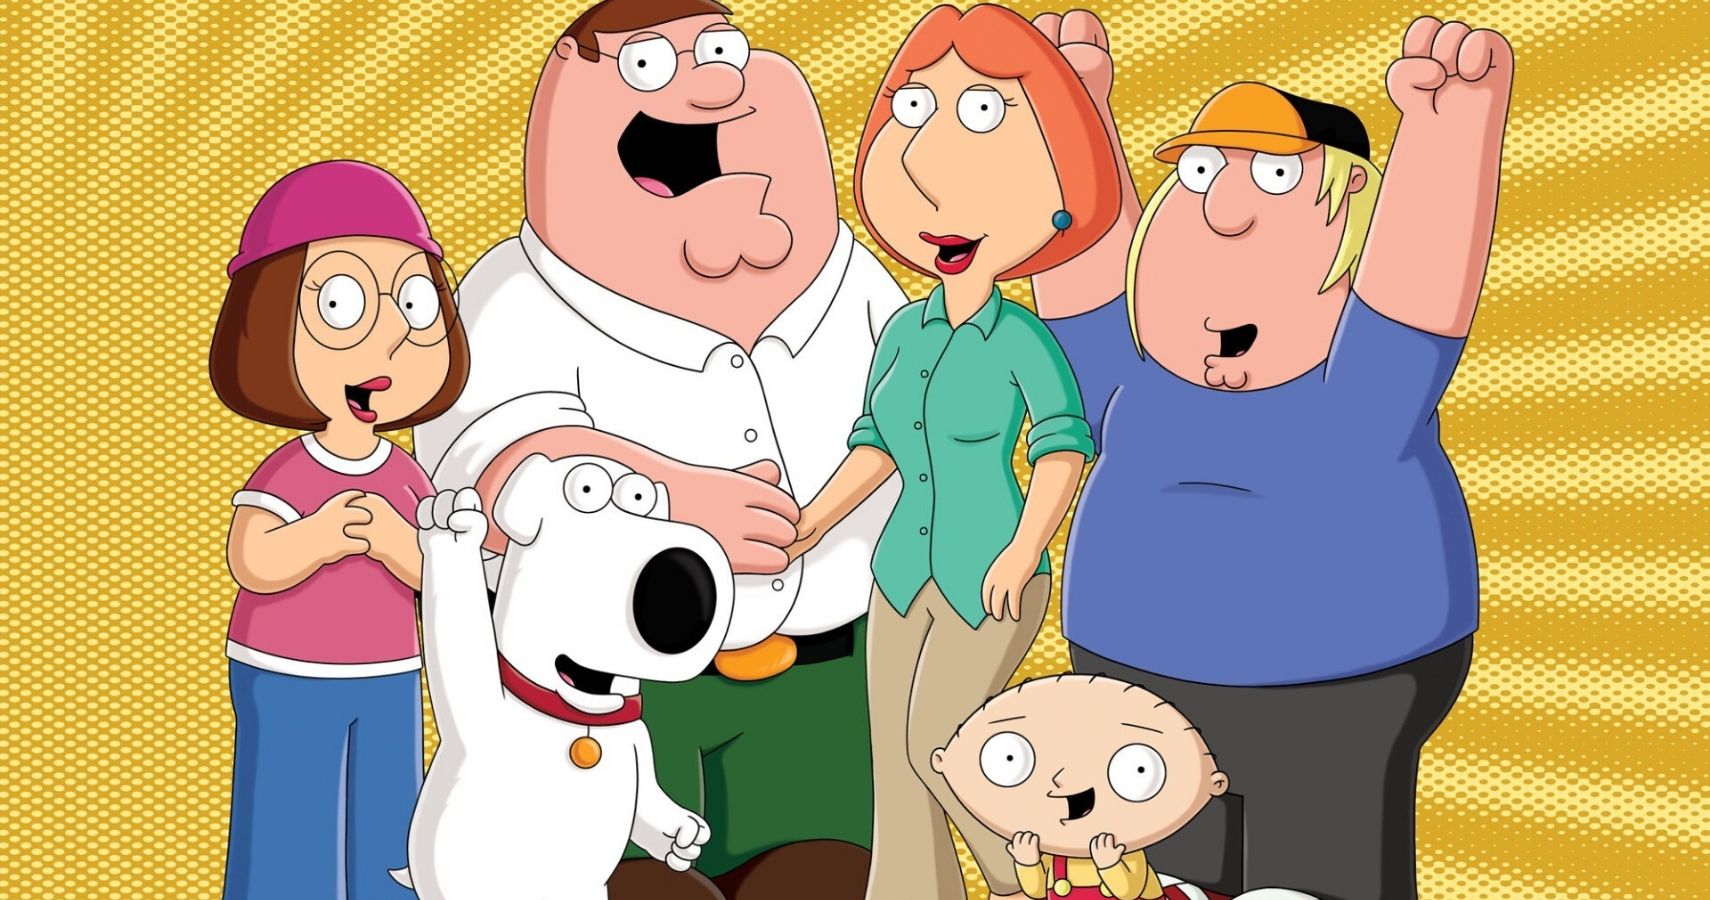 5 Running Gags On Family Guy That Wore Out Their Welcome (& 5 We Miss)